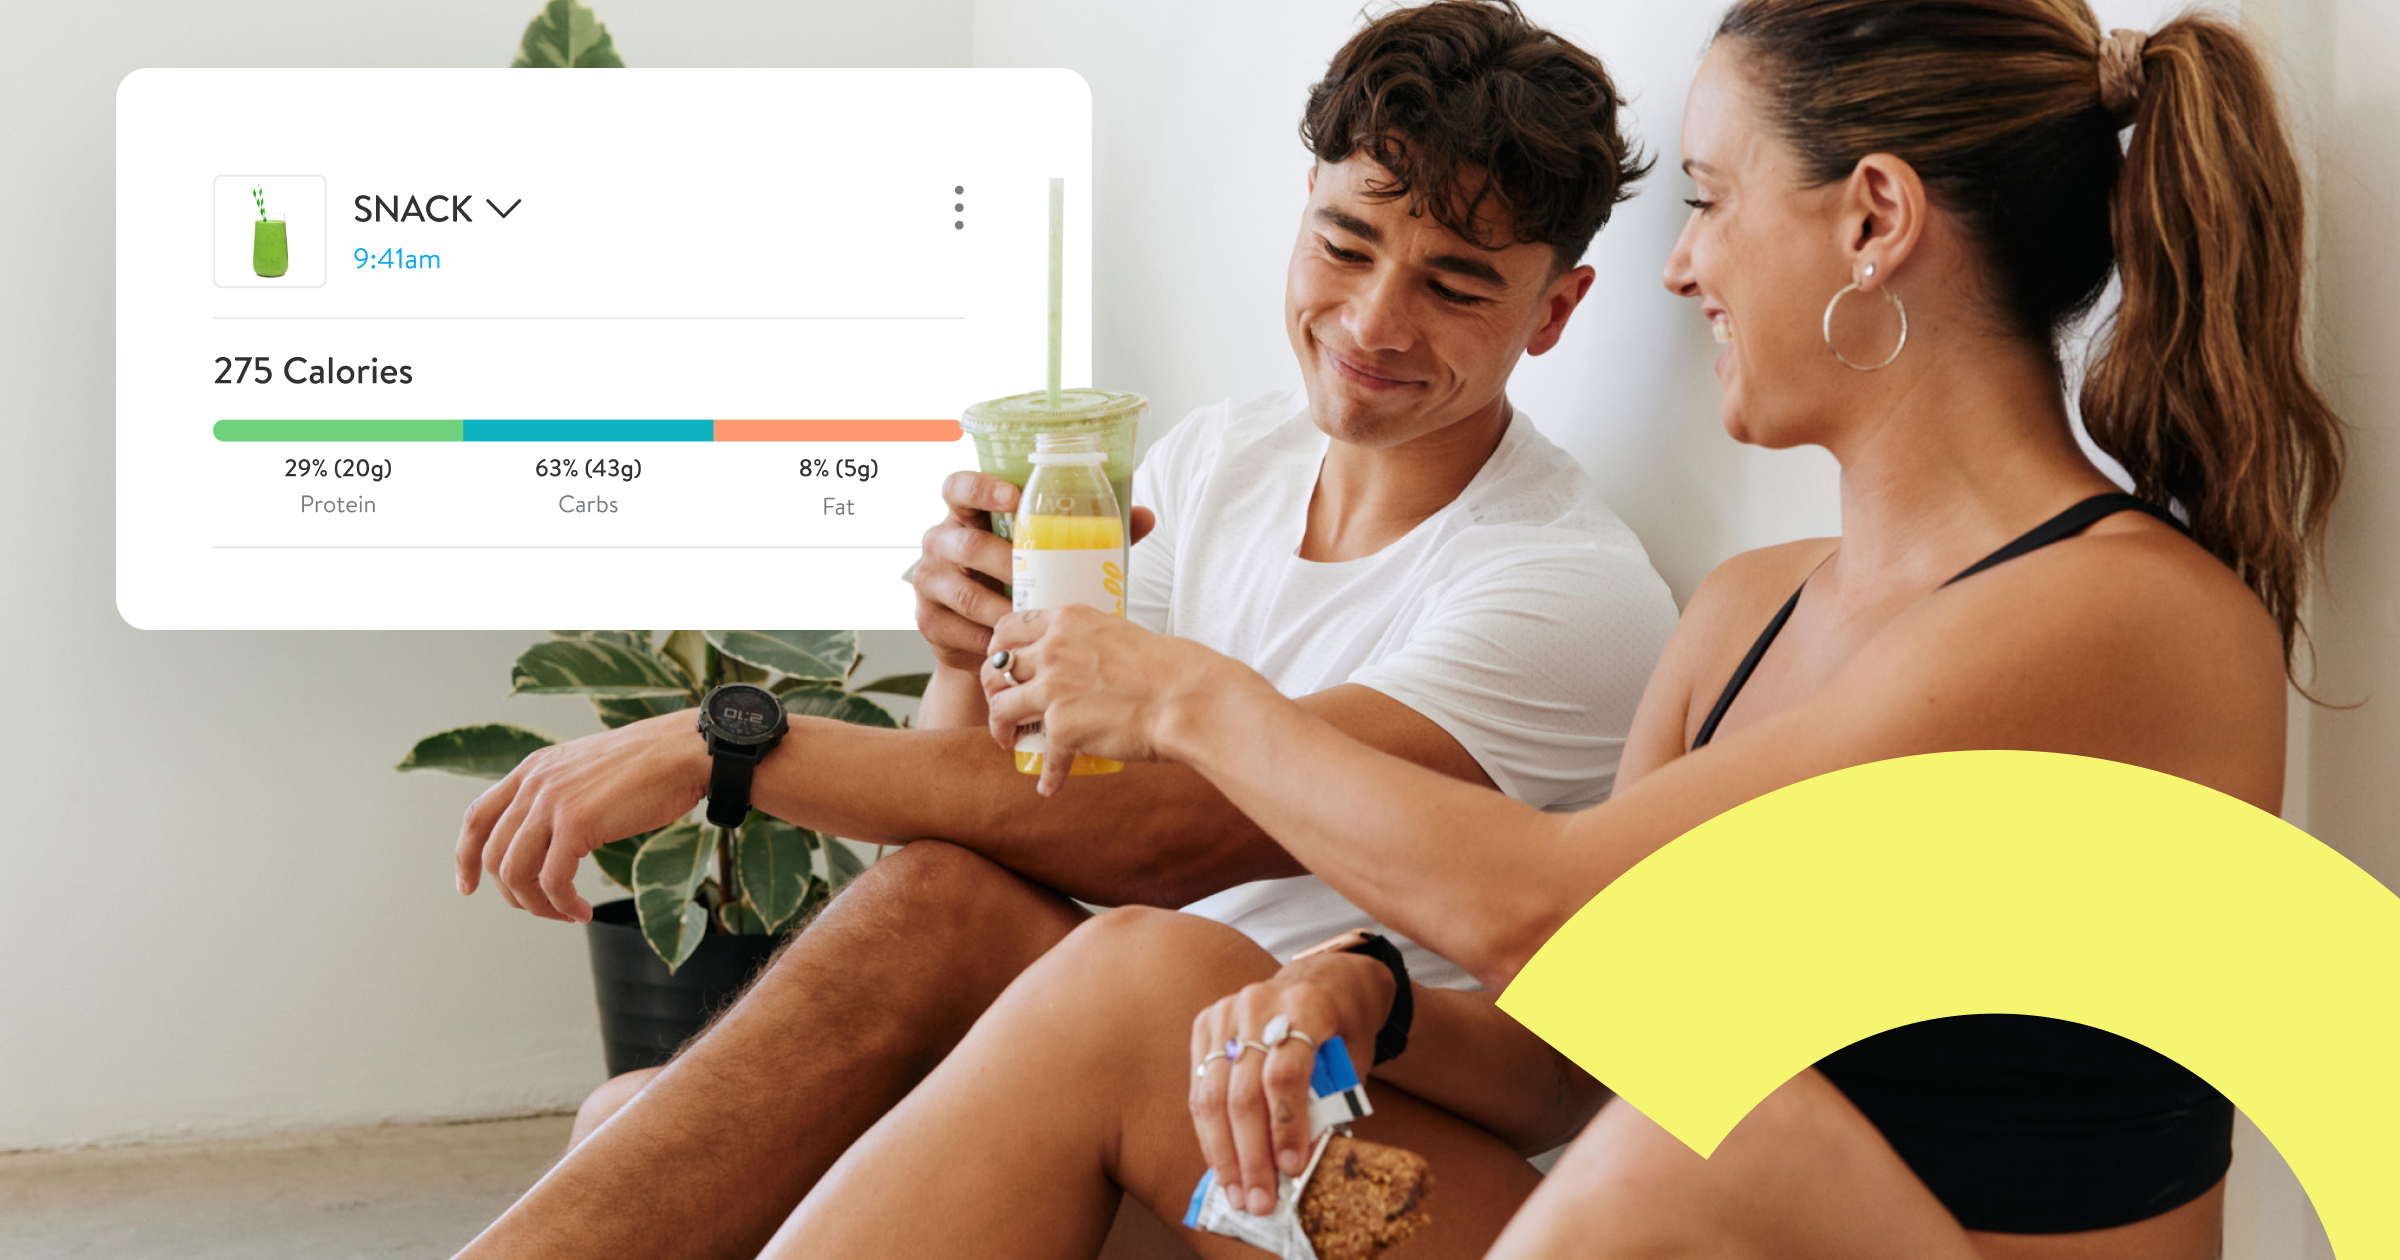 Two people sitting together with smoothies with a screen pop-up showing the macro and caloric breakdown of the smoothie from Trainerize's in-app meal tracker.